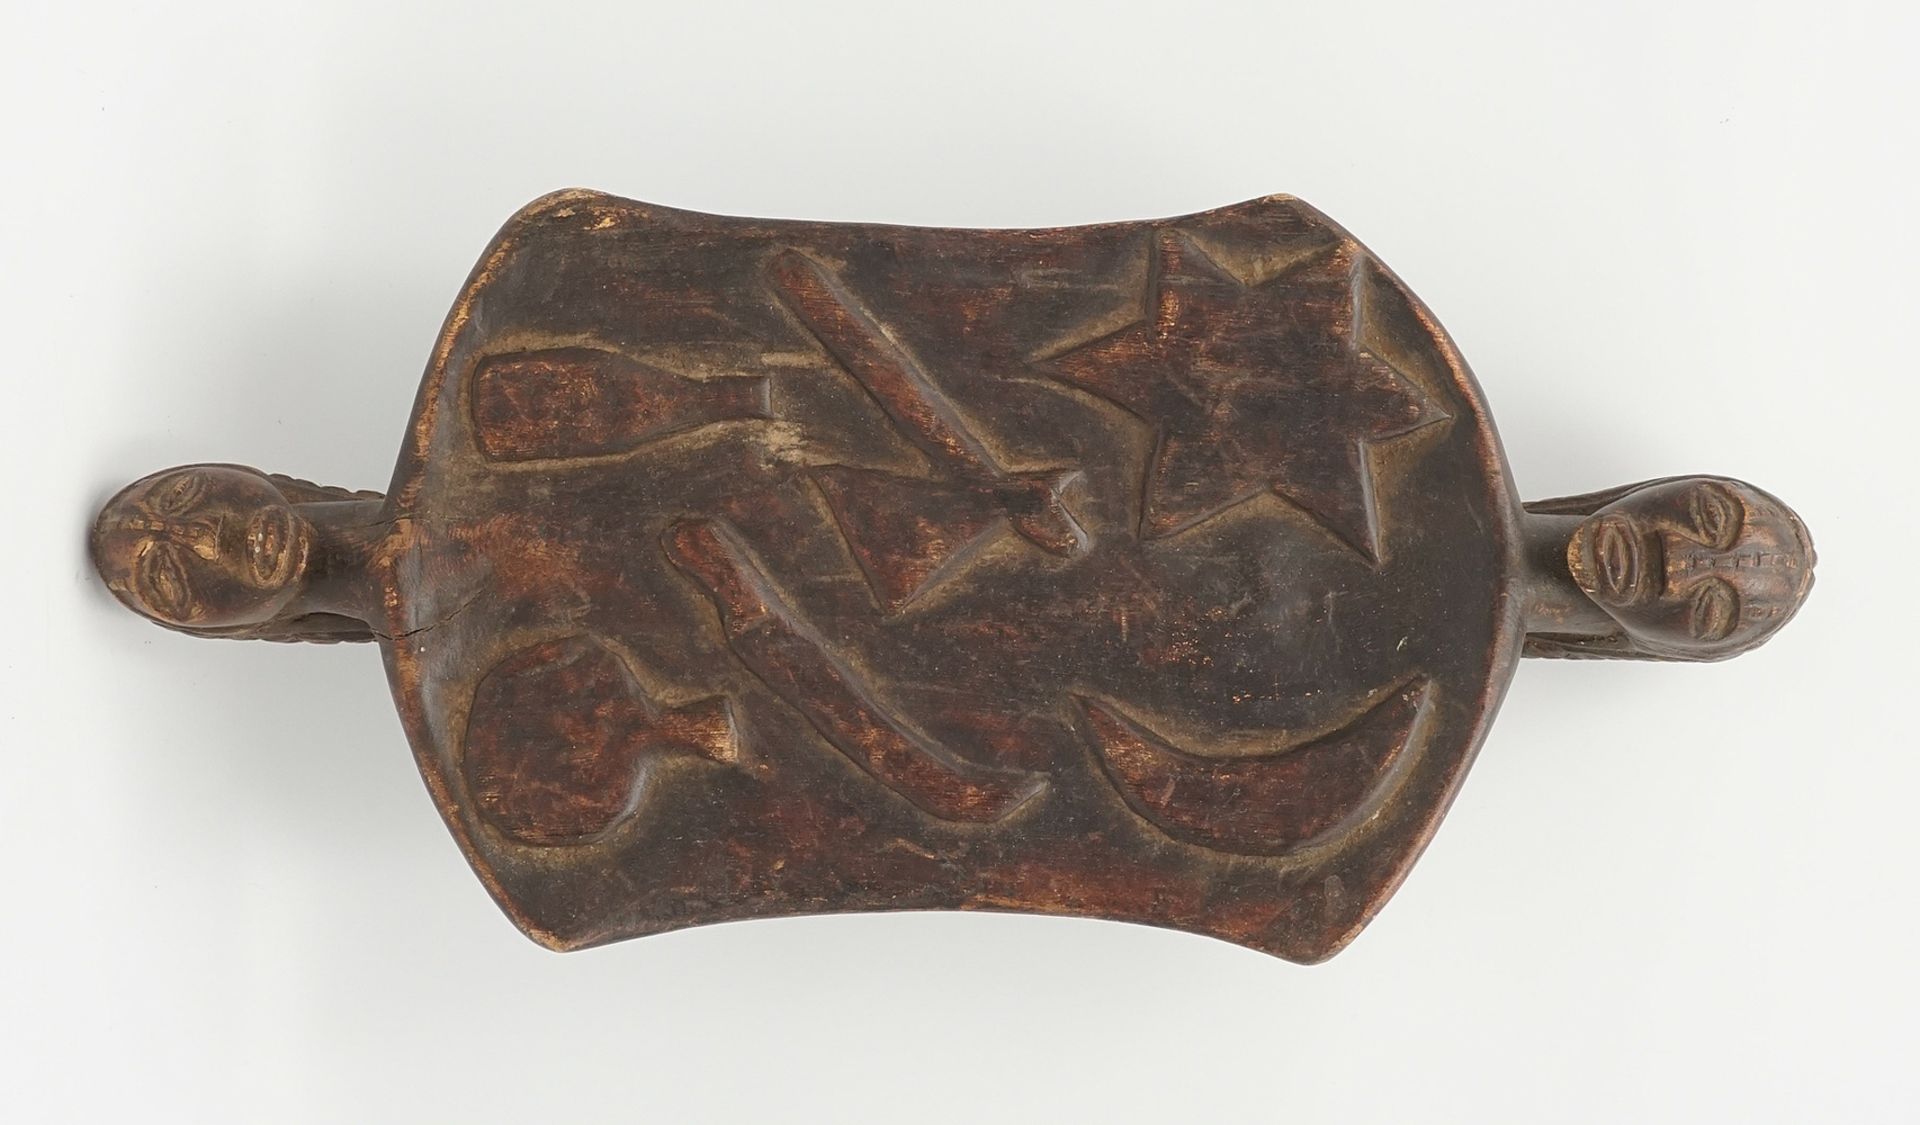 Ornamental tray with handles carved as heads, Africa - Image 3 of 5